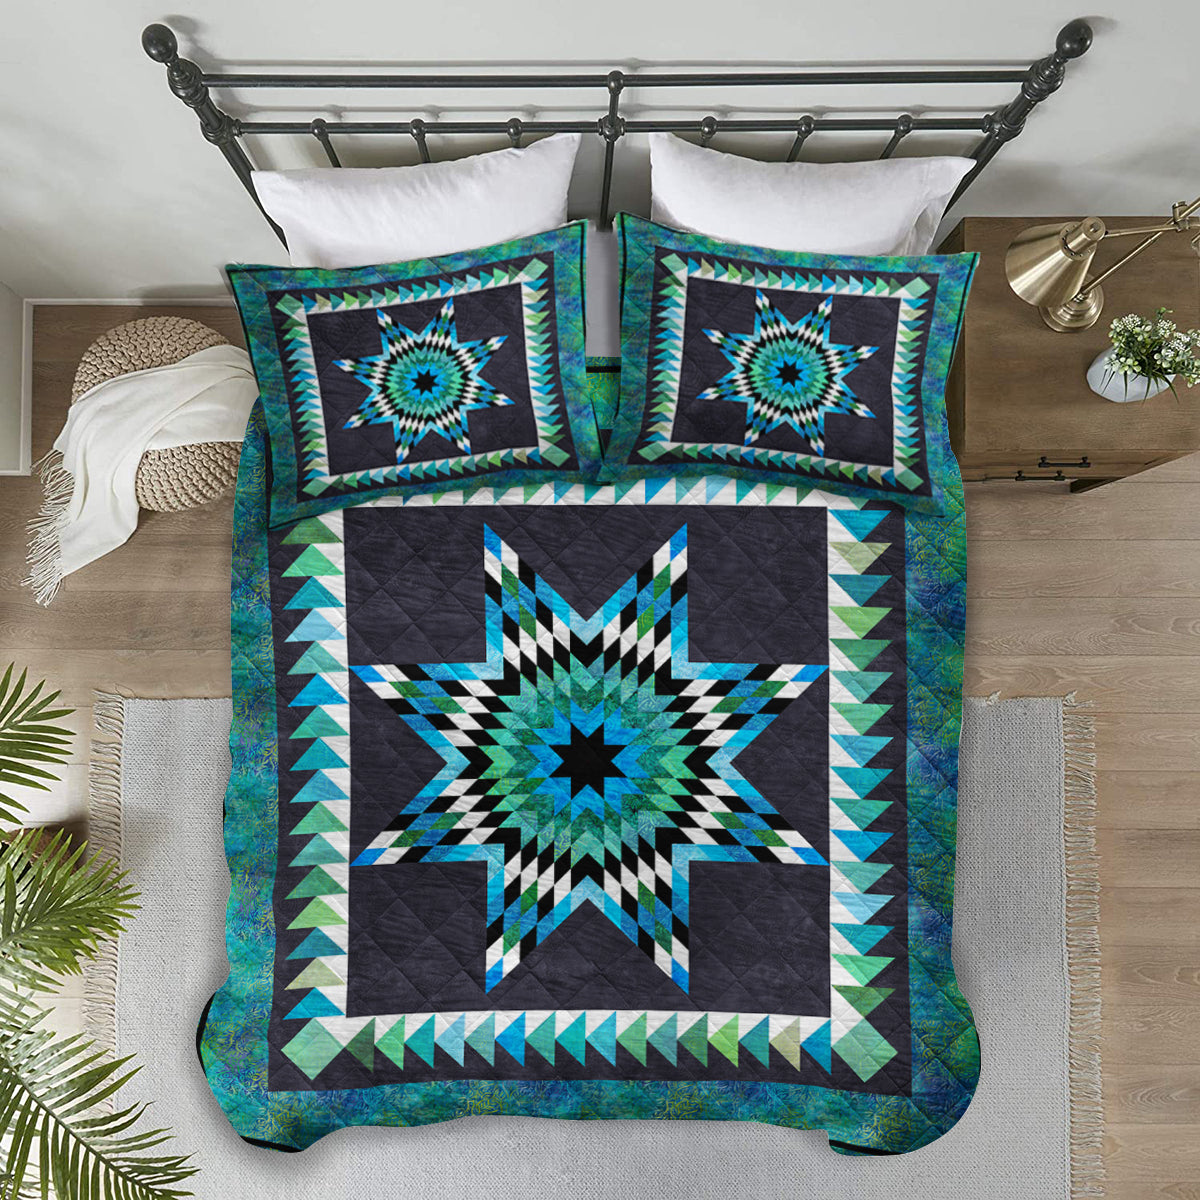 Native American Inspired Star Quilt Bed Sheet HN280504MBS